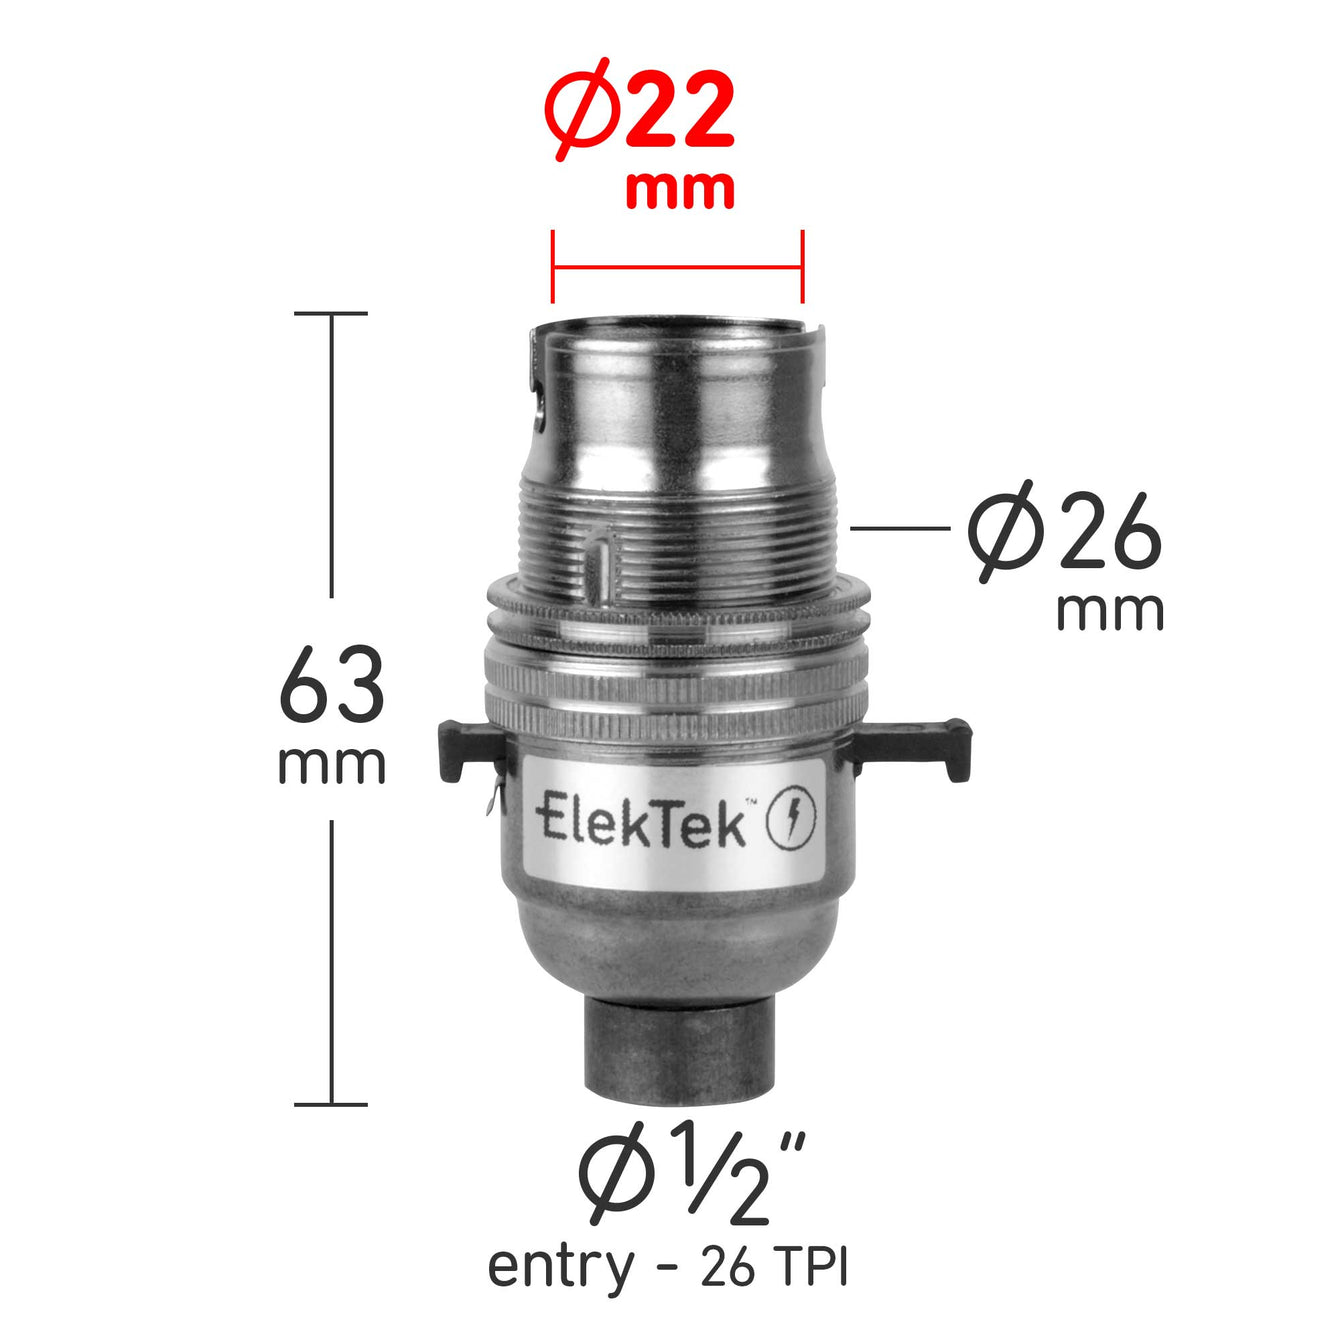 ElekTek Safety Switch Lamp Holder Bayonet Cap B22 10mm or Half Inch Entry With Shade Ring Solid Brass 